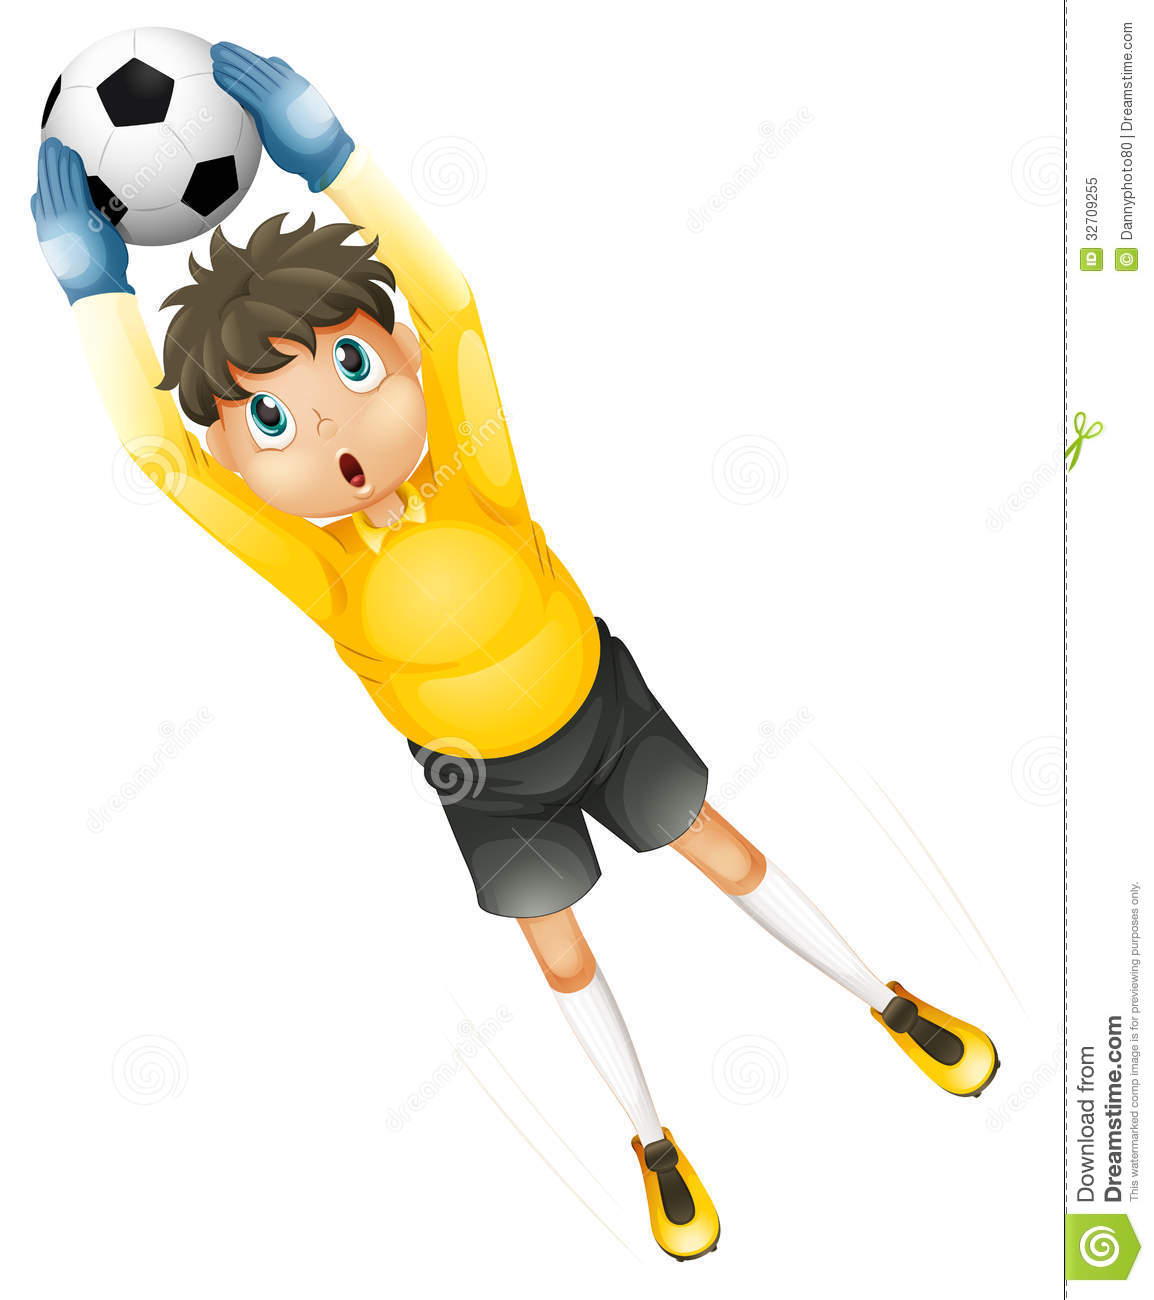 Illustration Of A Little Football Player Catching The Ball On A White